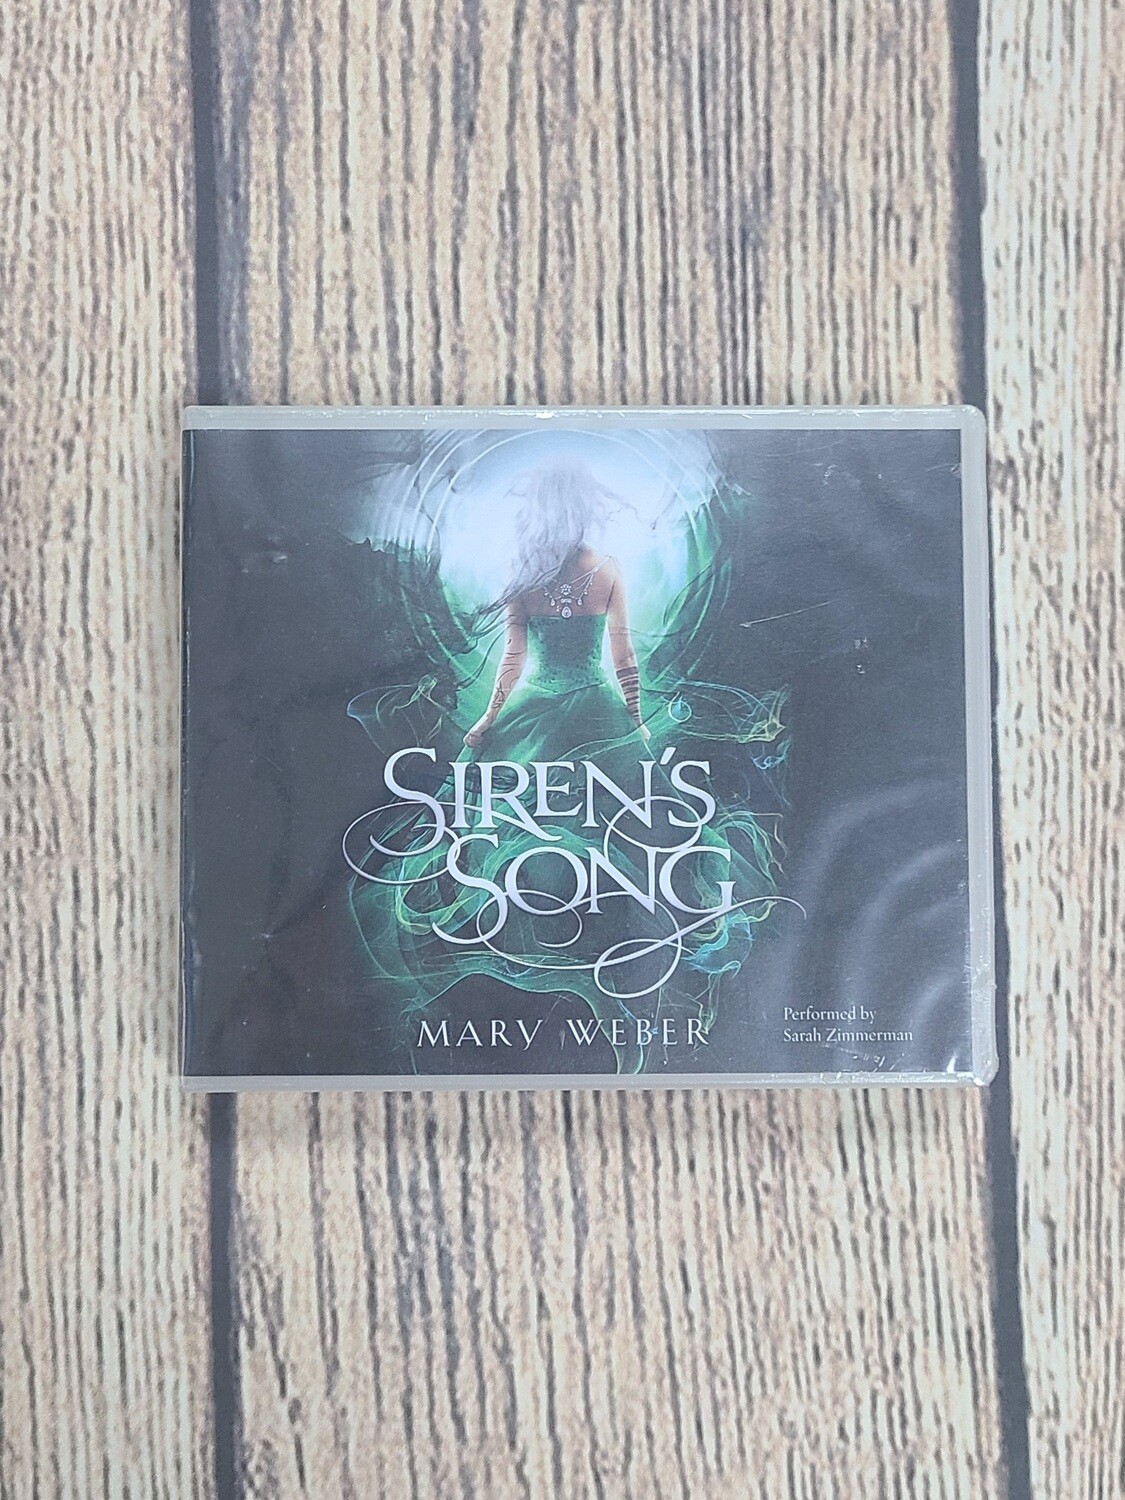 Siren's Song by Mary Weber - Audiobook